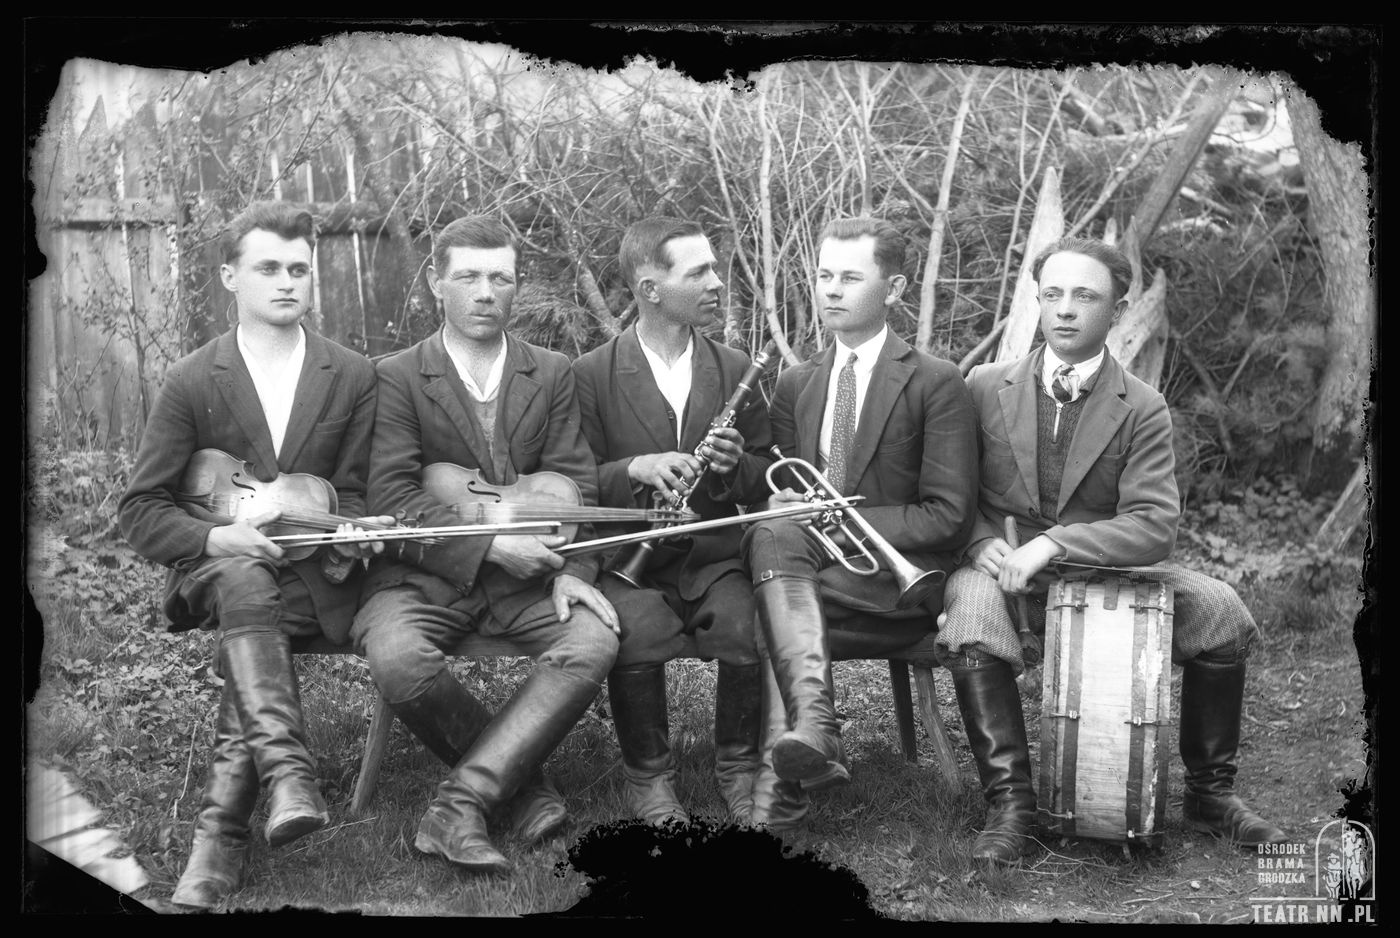 an old black and white posed photo showing five men sitting on a bench. Each is holding a instrument. We see two violins, a clarinet, a trupet and a drum - baraban